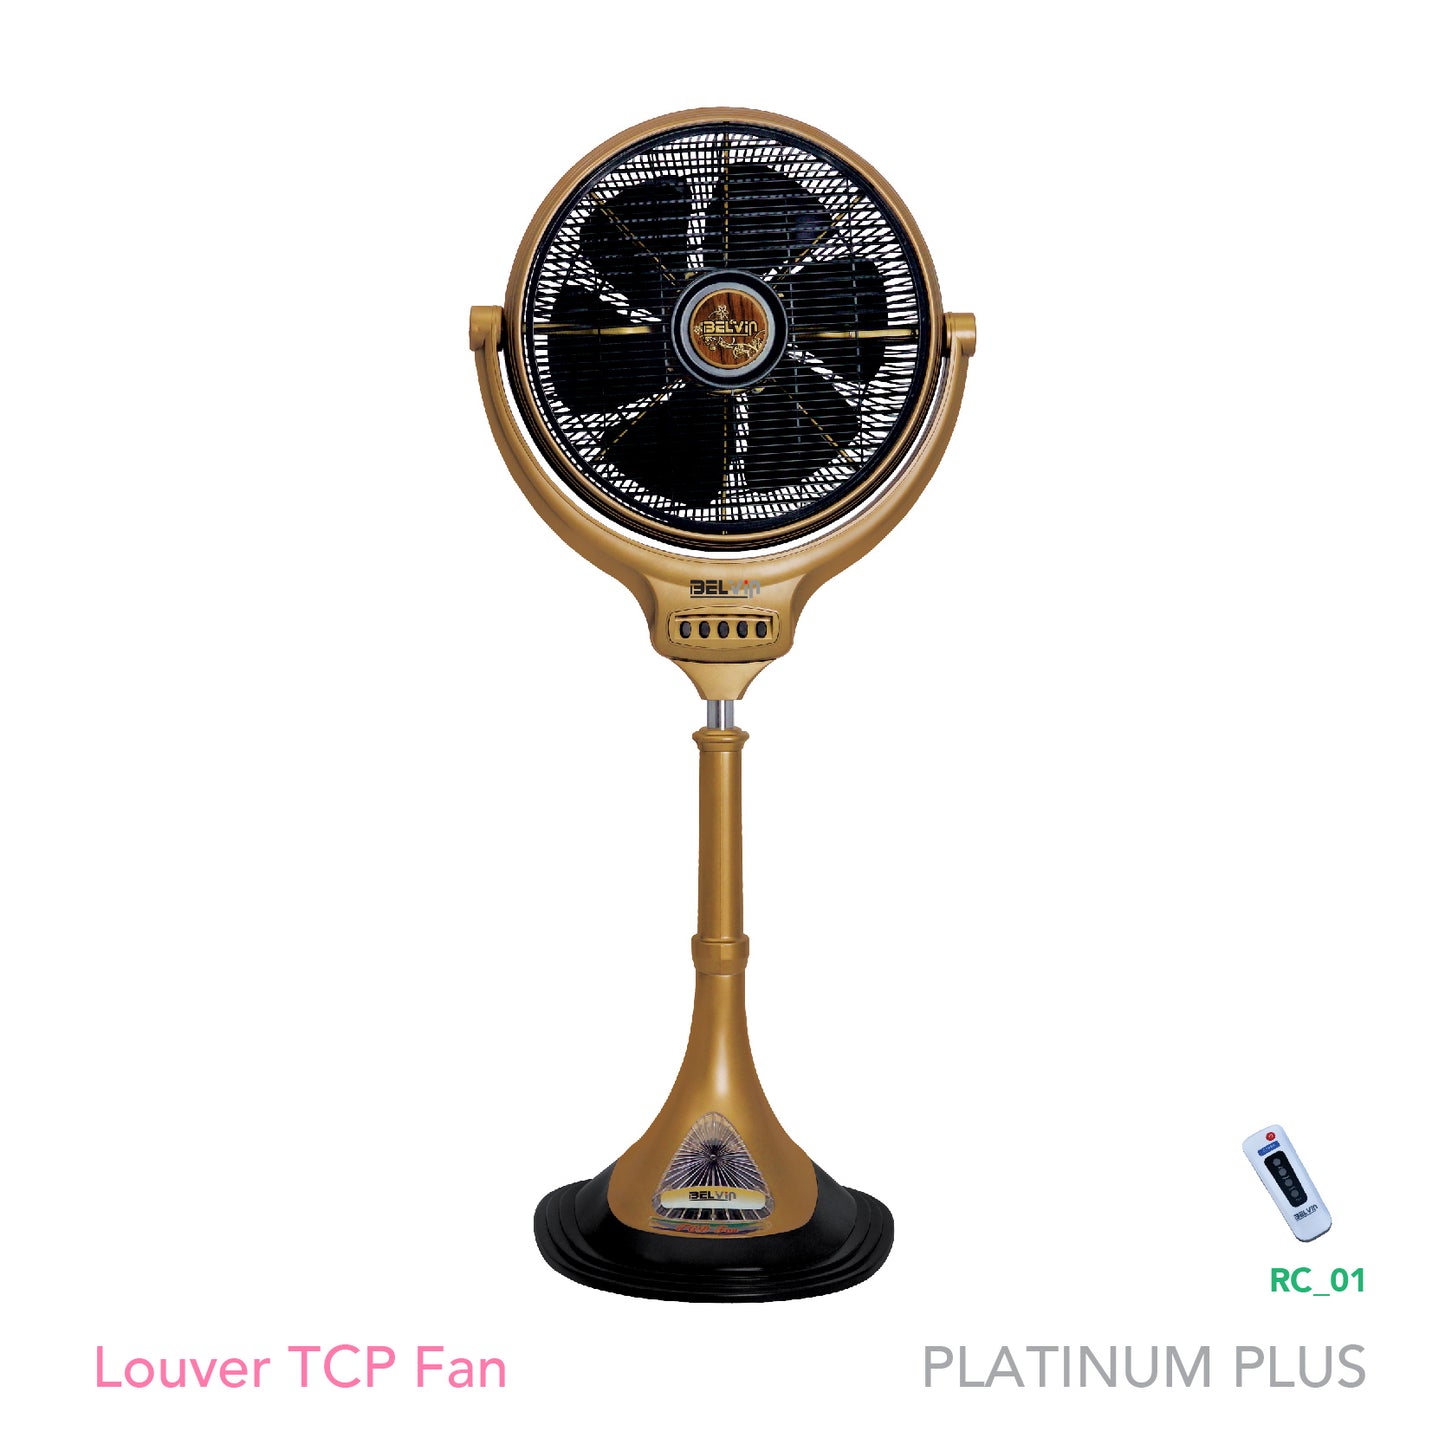 Belvin Louver Tcp 14' Fans Platinum Plus Series 3 Speed Operation Through Switch Brand Warranty